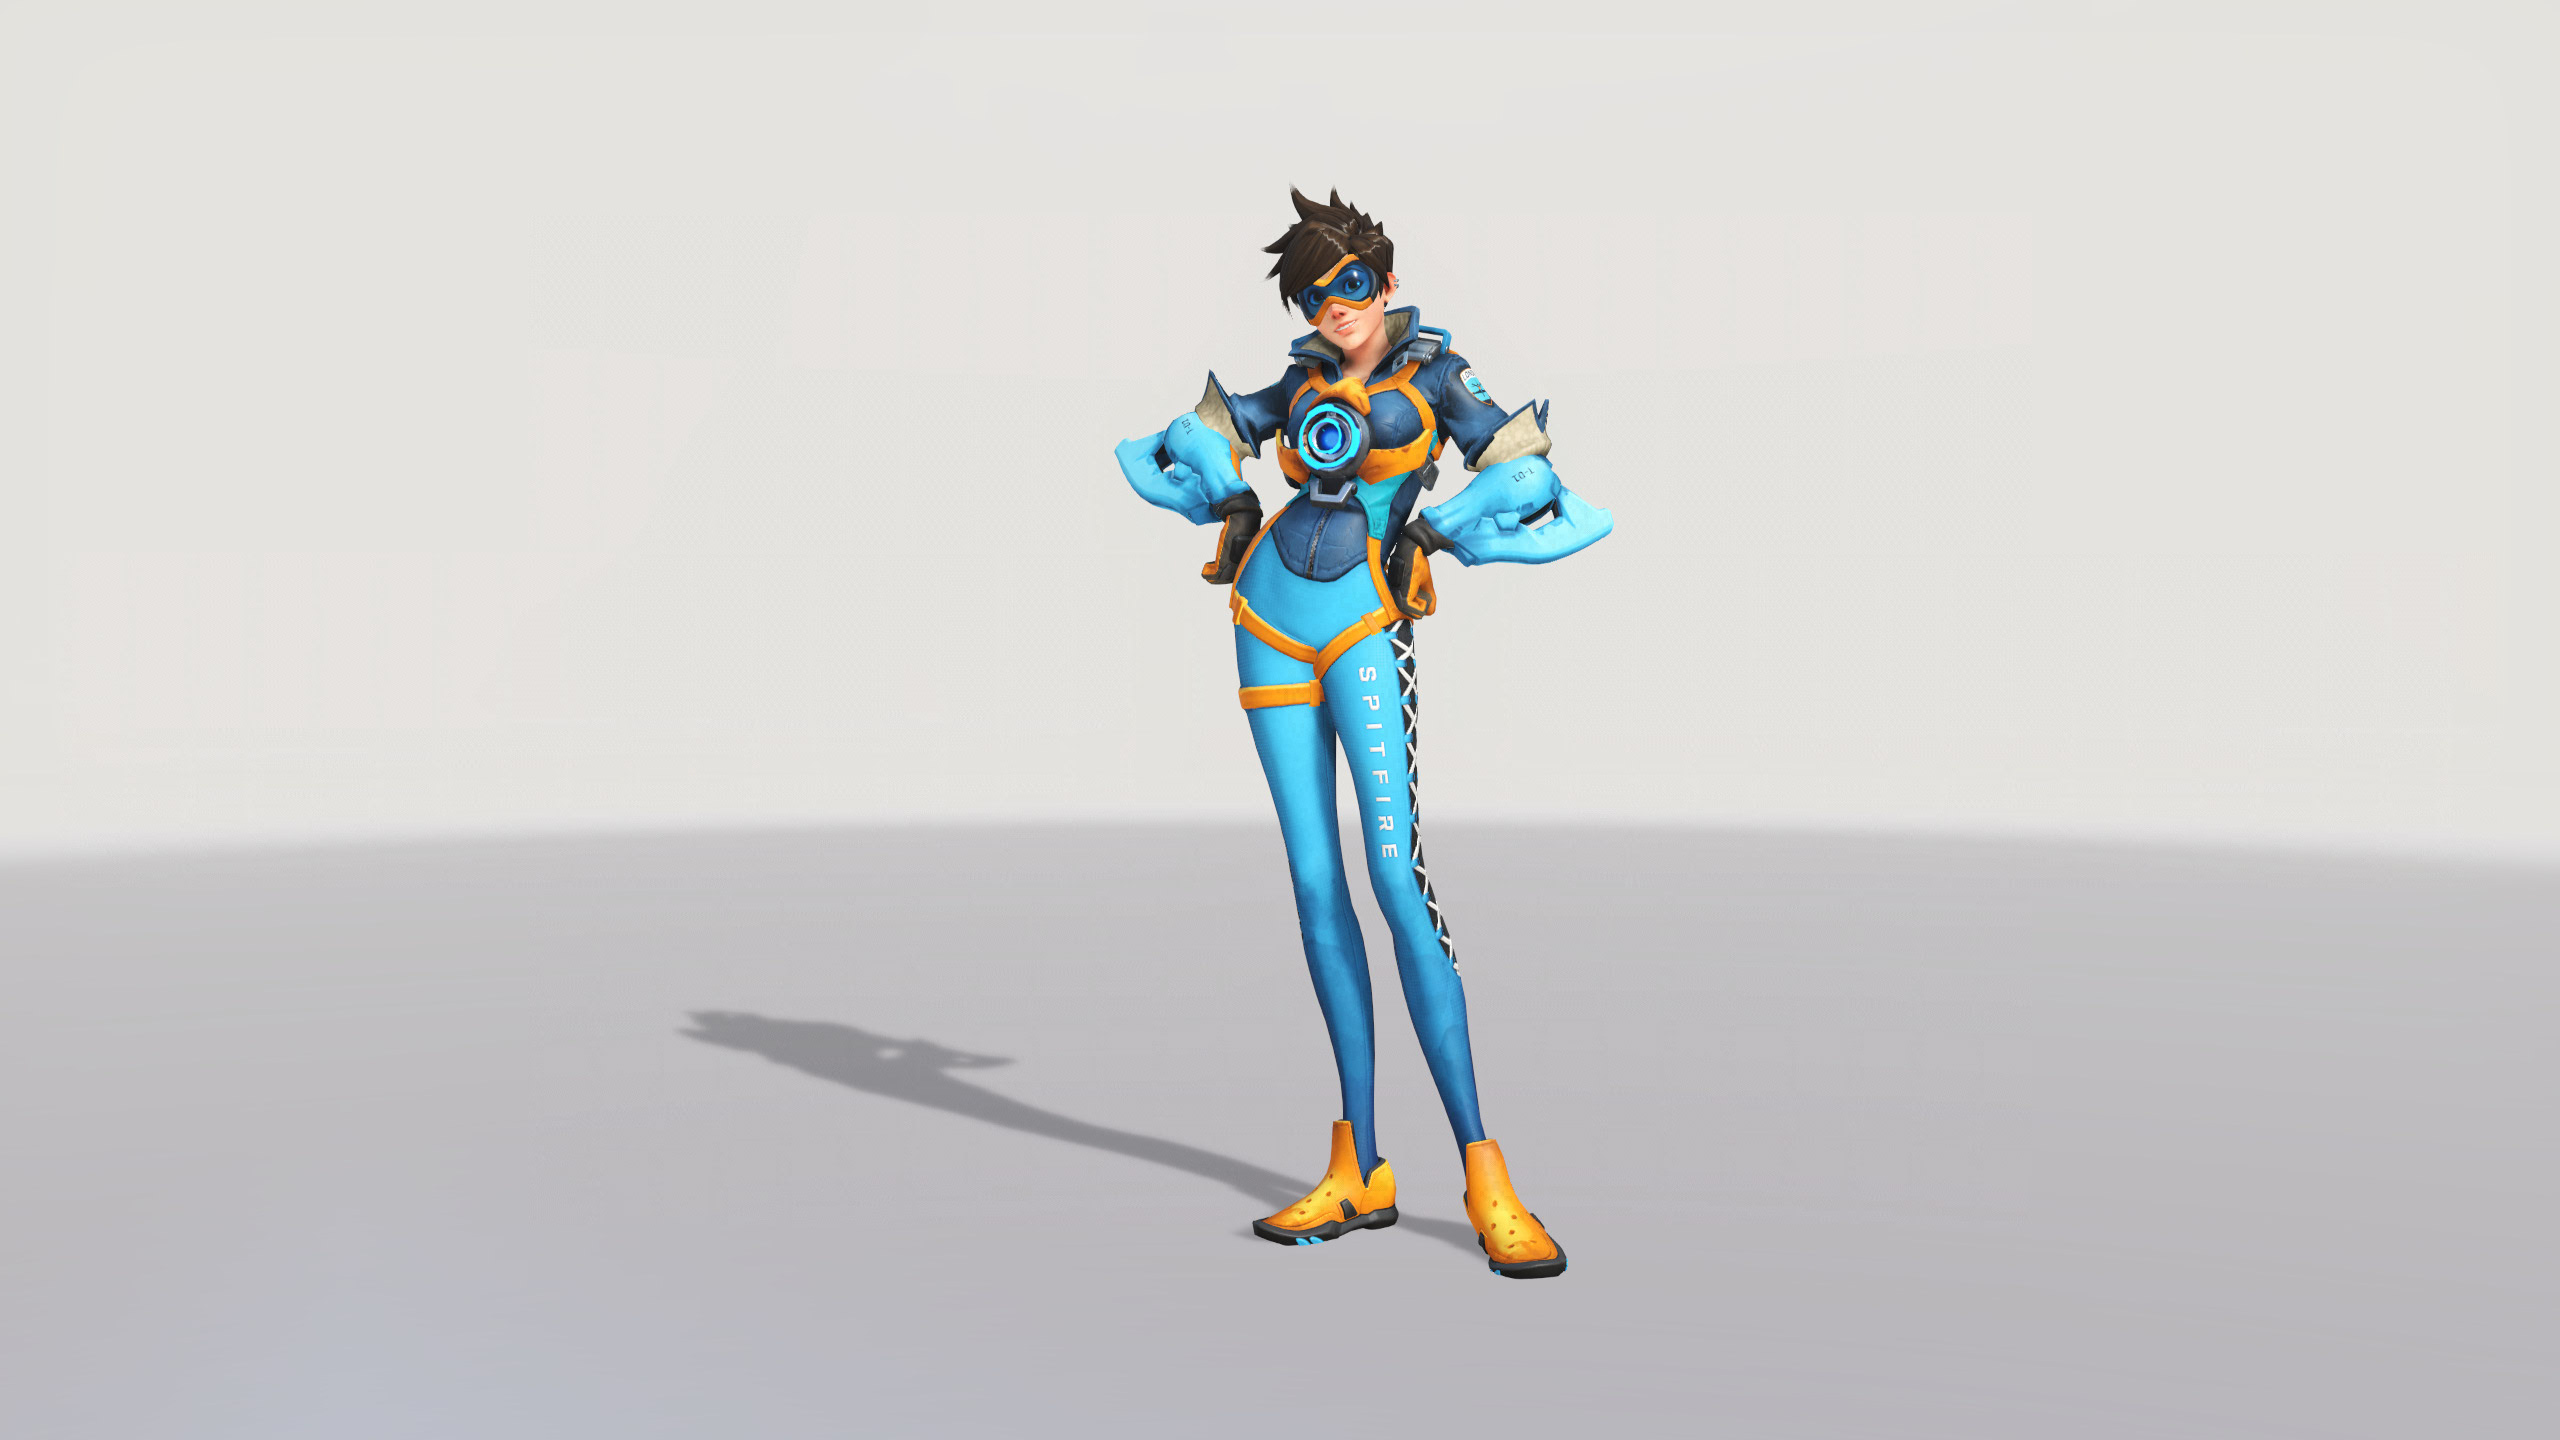 Overwatch Skin: Tracer [360 View]